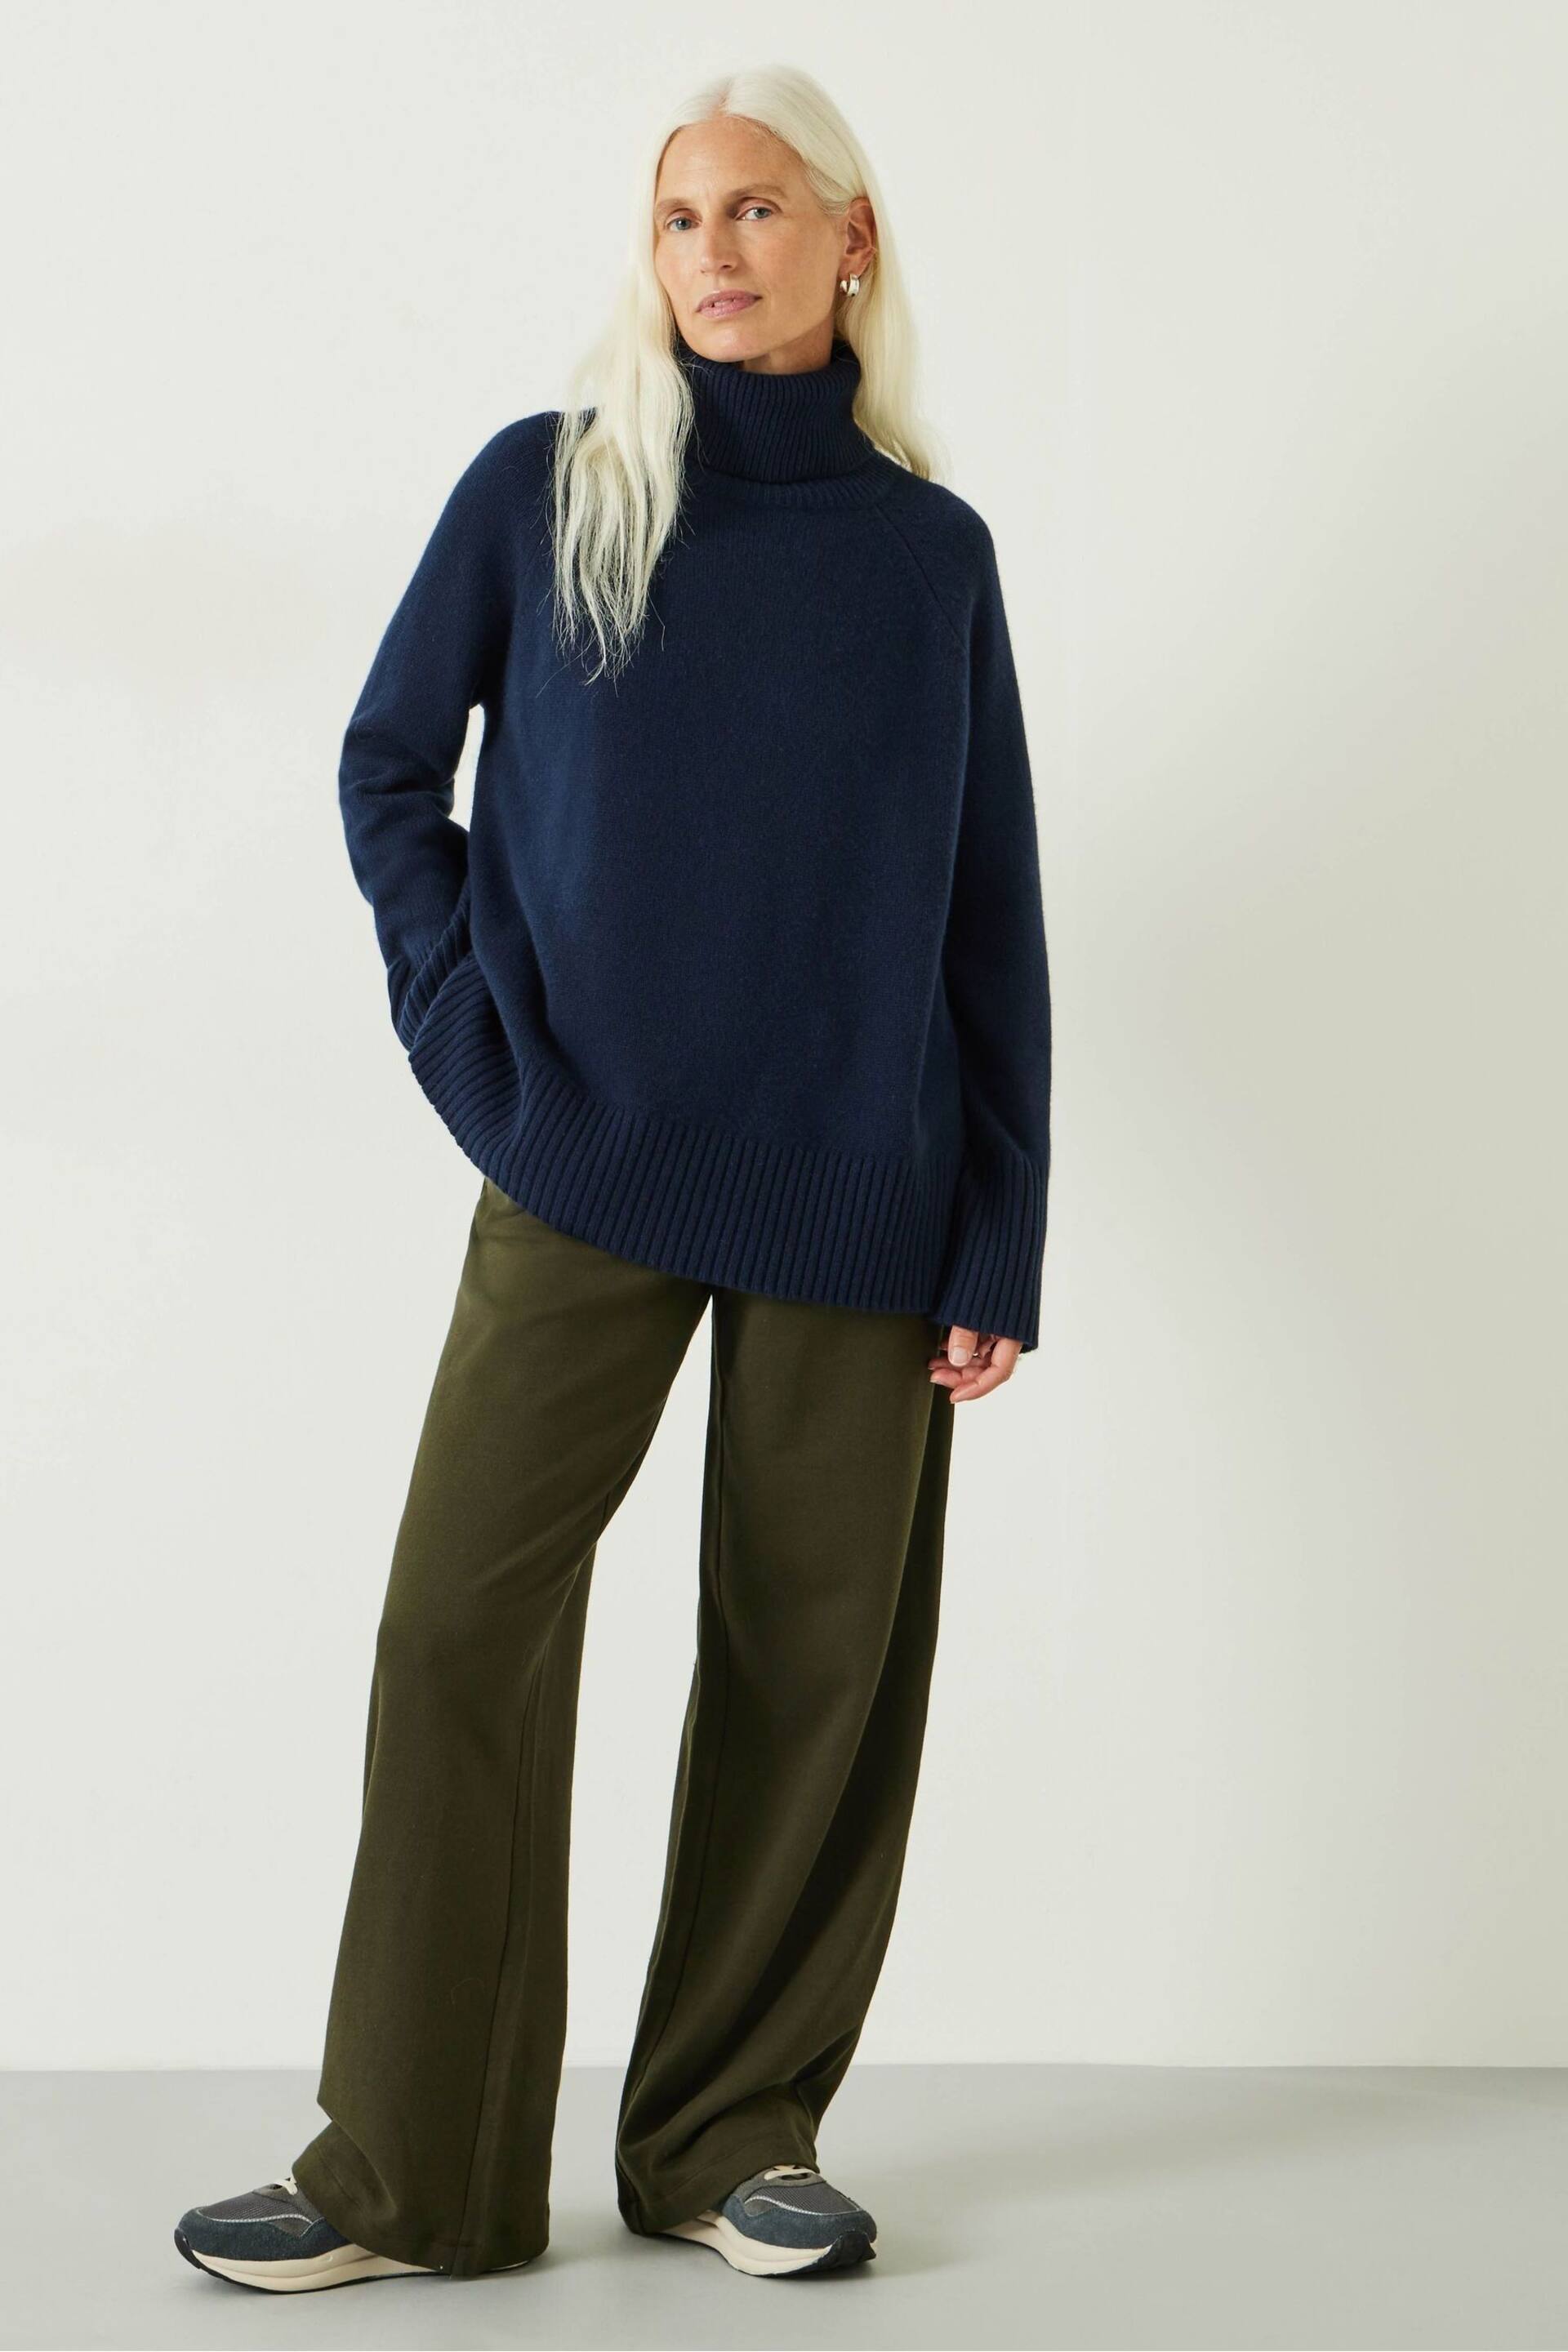 Hush Green Light Theo Tailored Jersey Trousers - Image 1 of 5